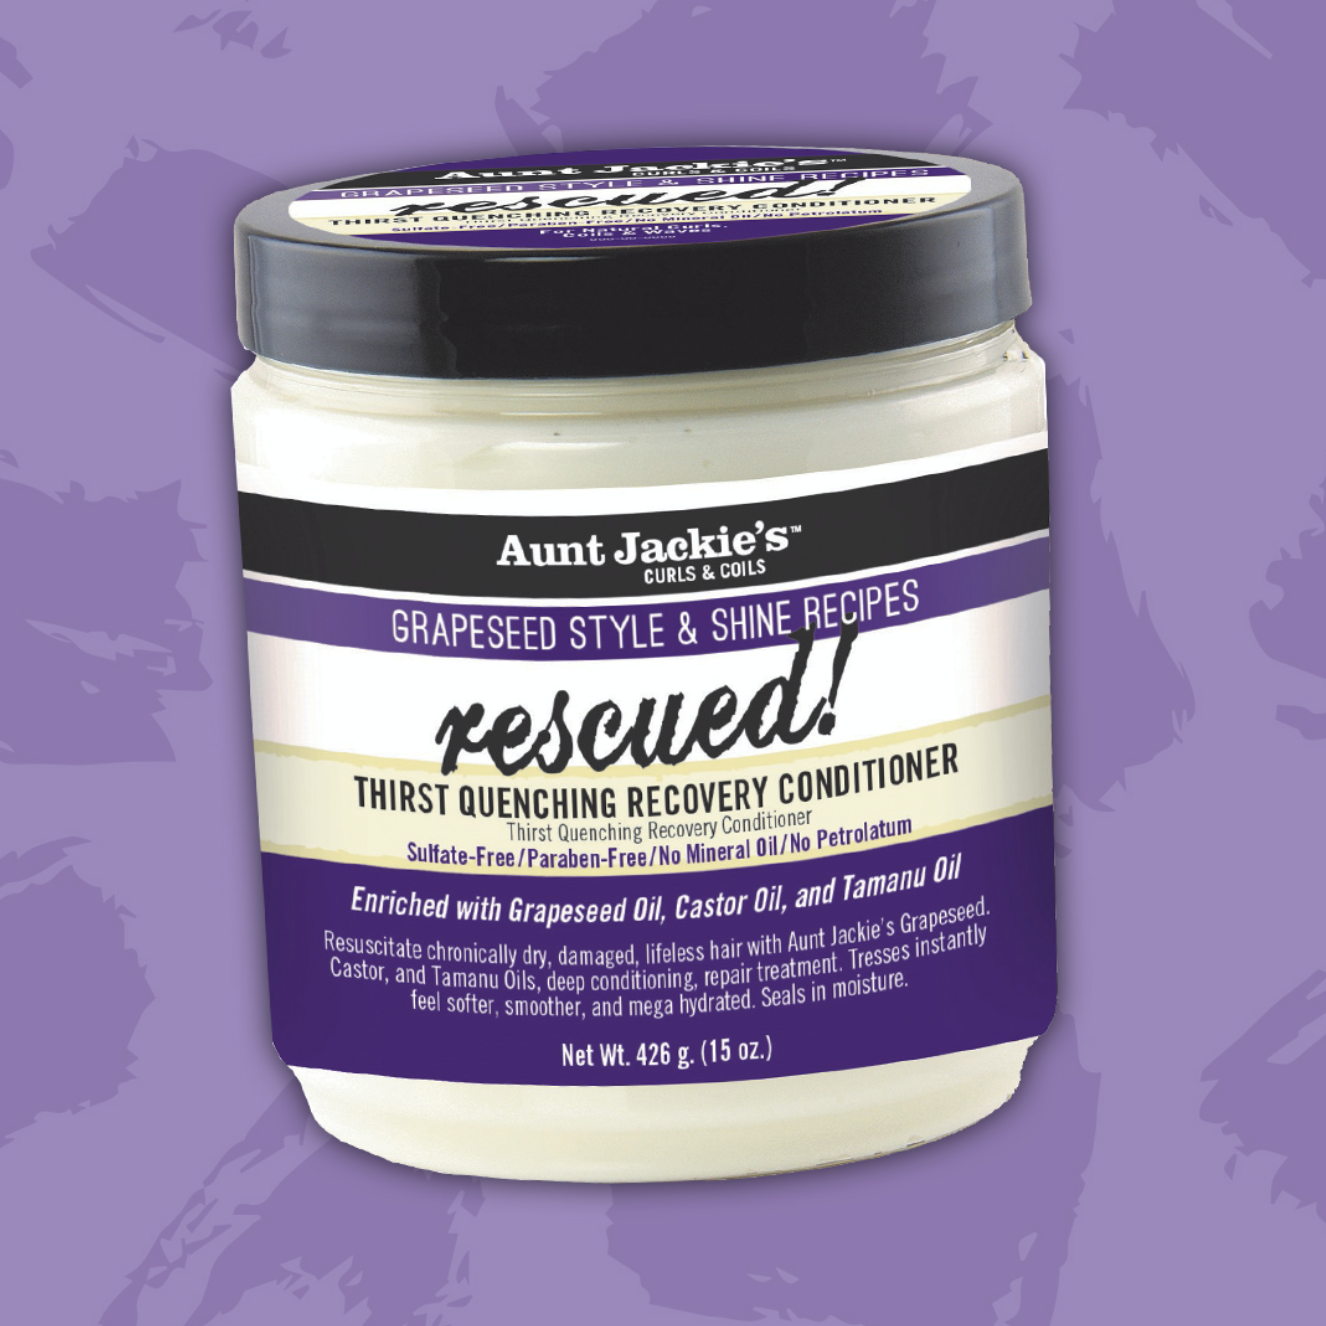 Aunt Jackie's - Grapeseed Rescued! - Thirst Quenching Recovery Conditioner 15oz